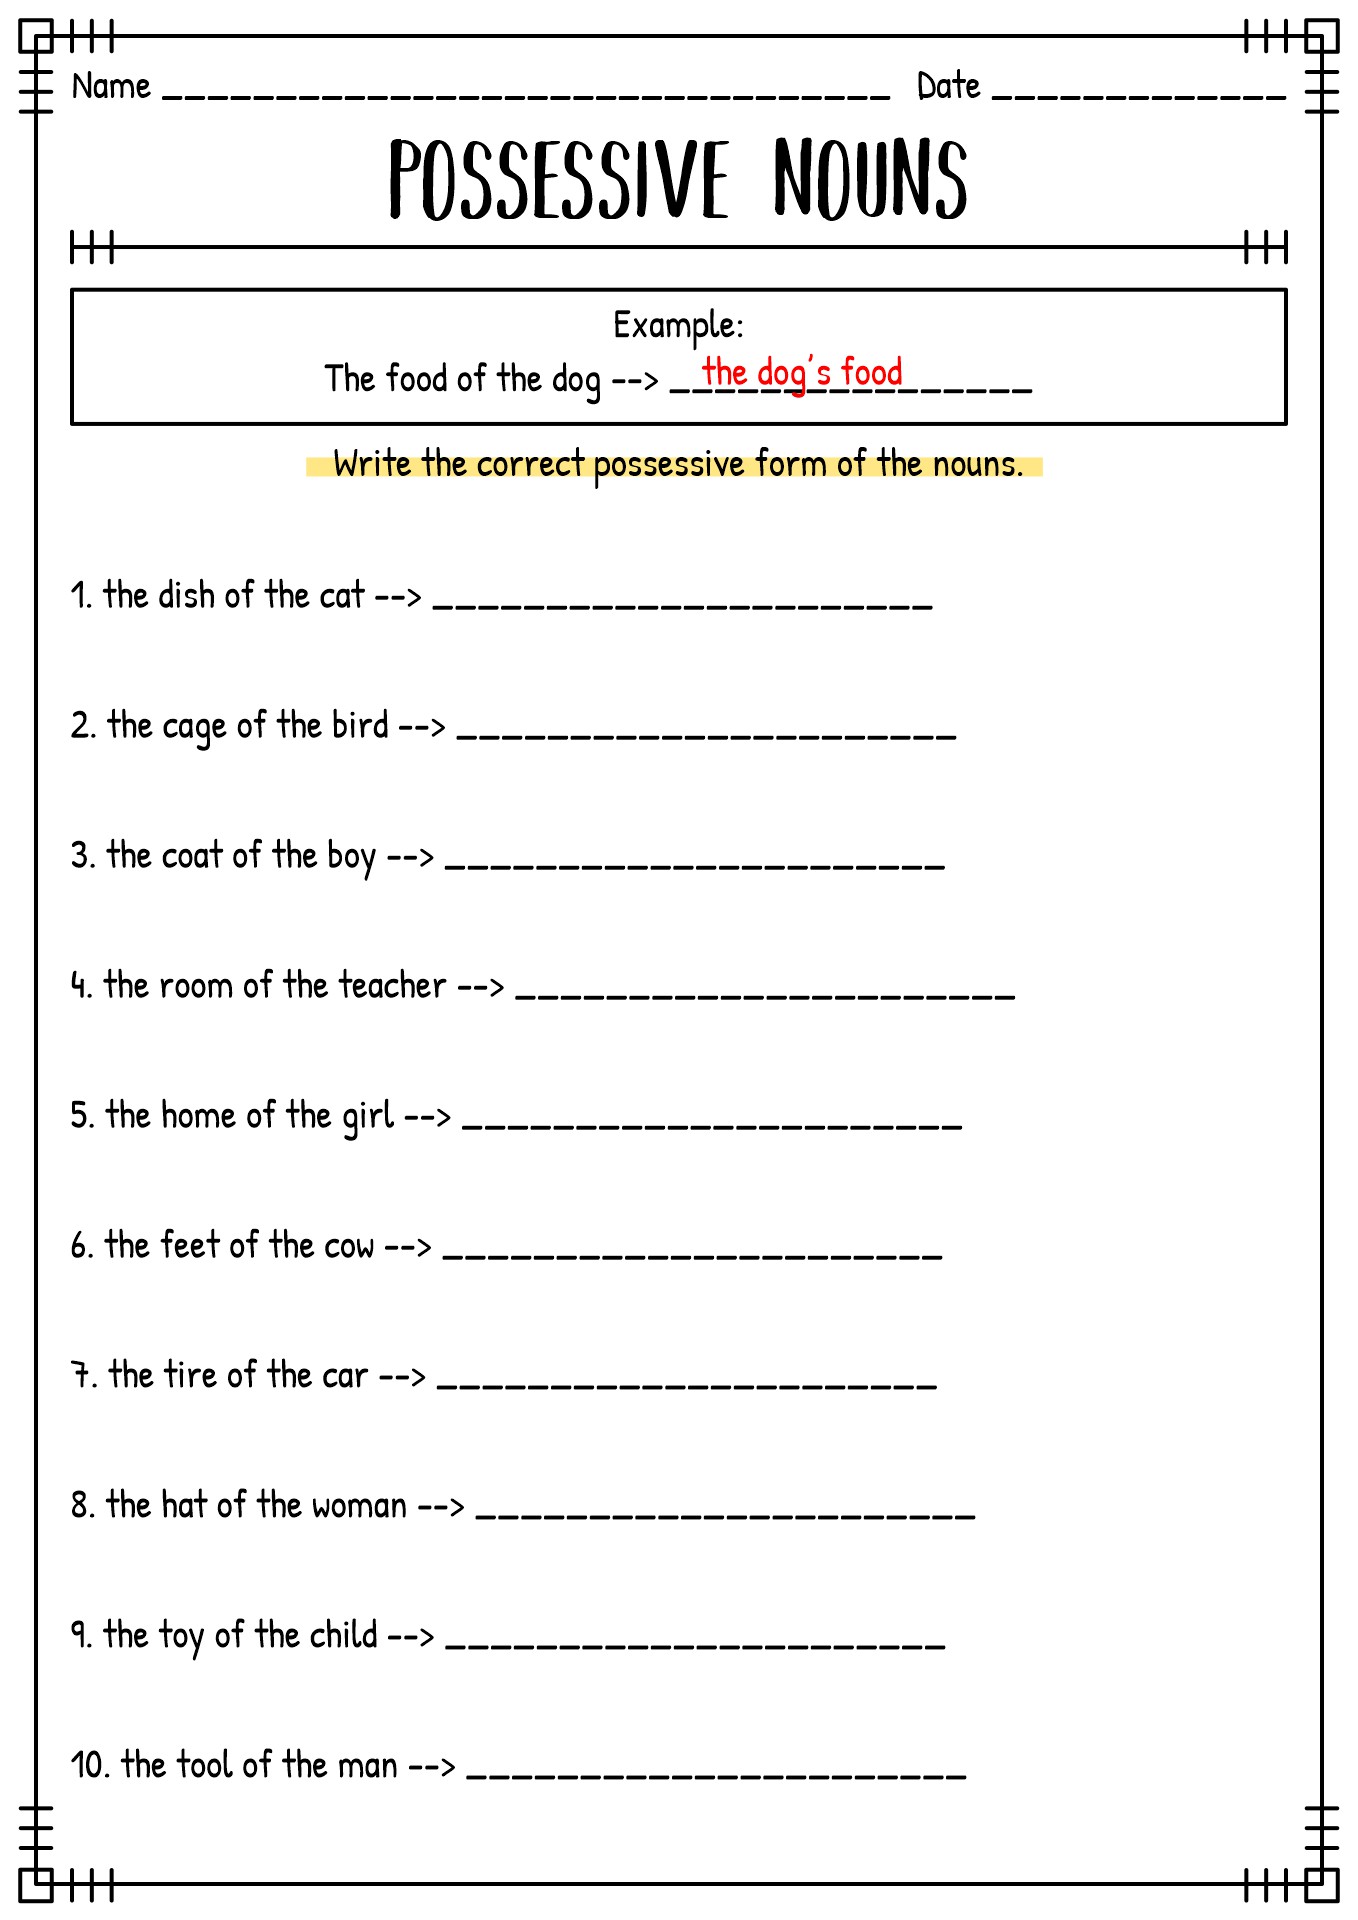 fun-with-plural-possessive-nouns-worksheets-possessive-apostrophe-singular-possessive-nouns